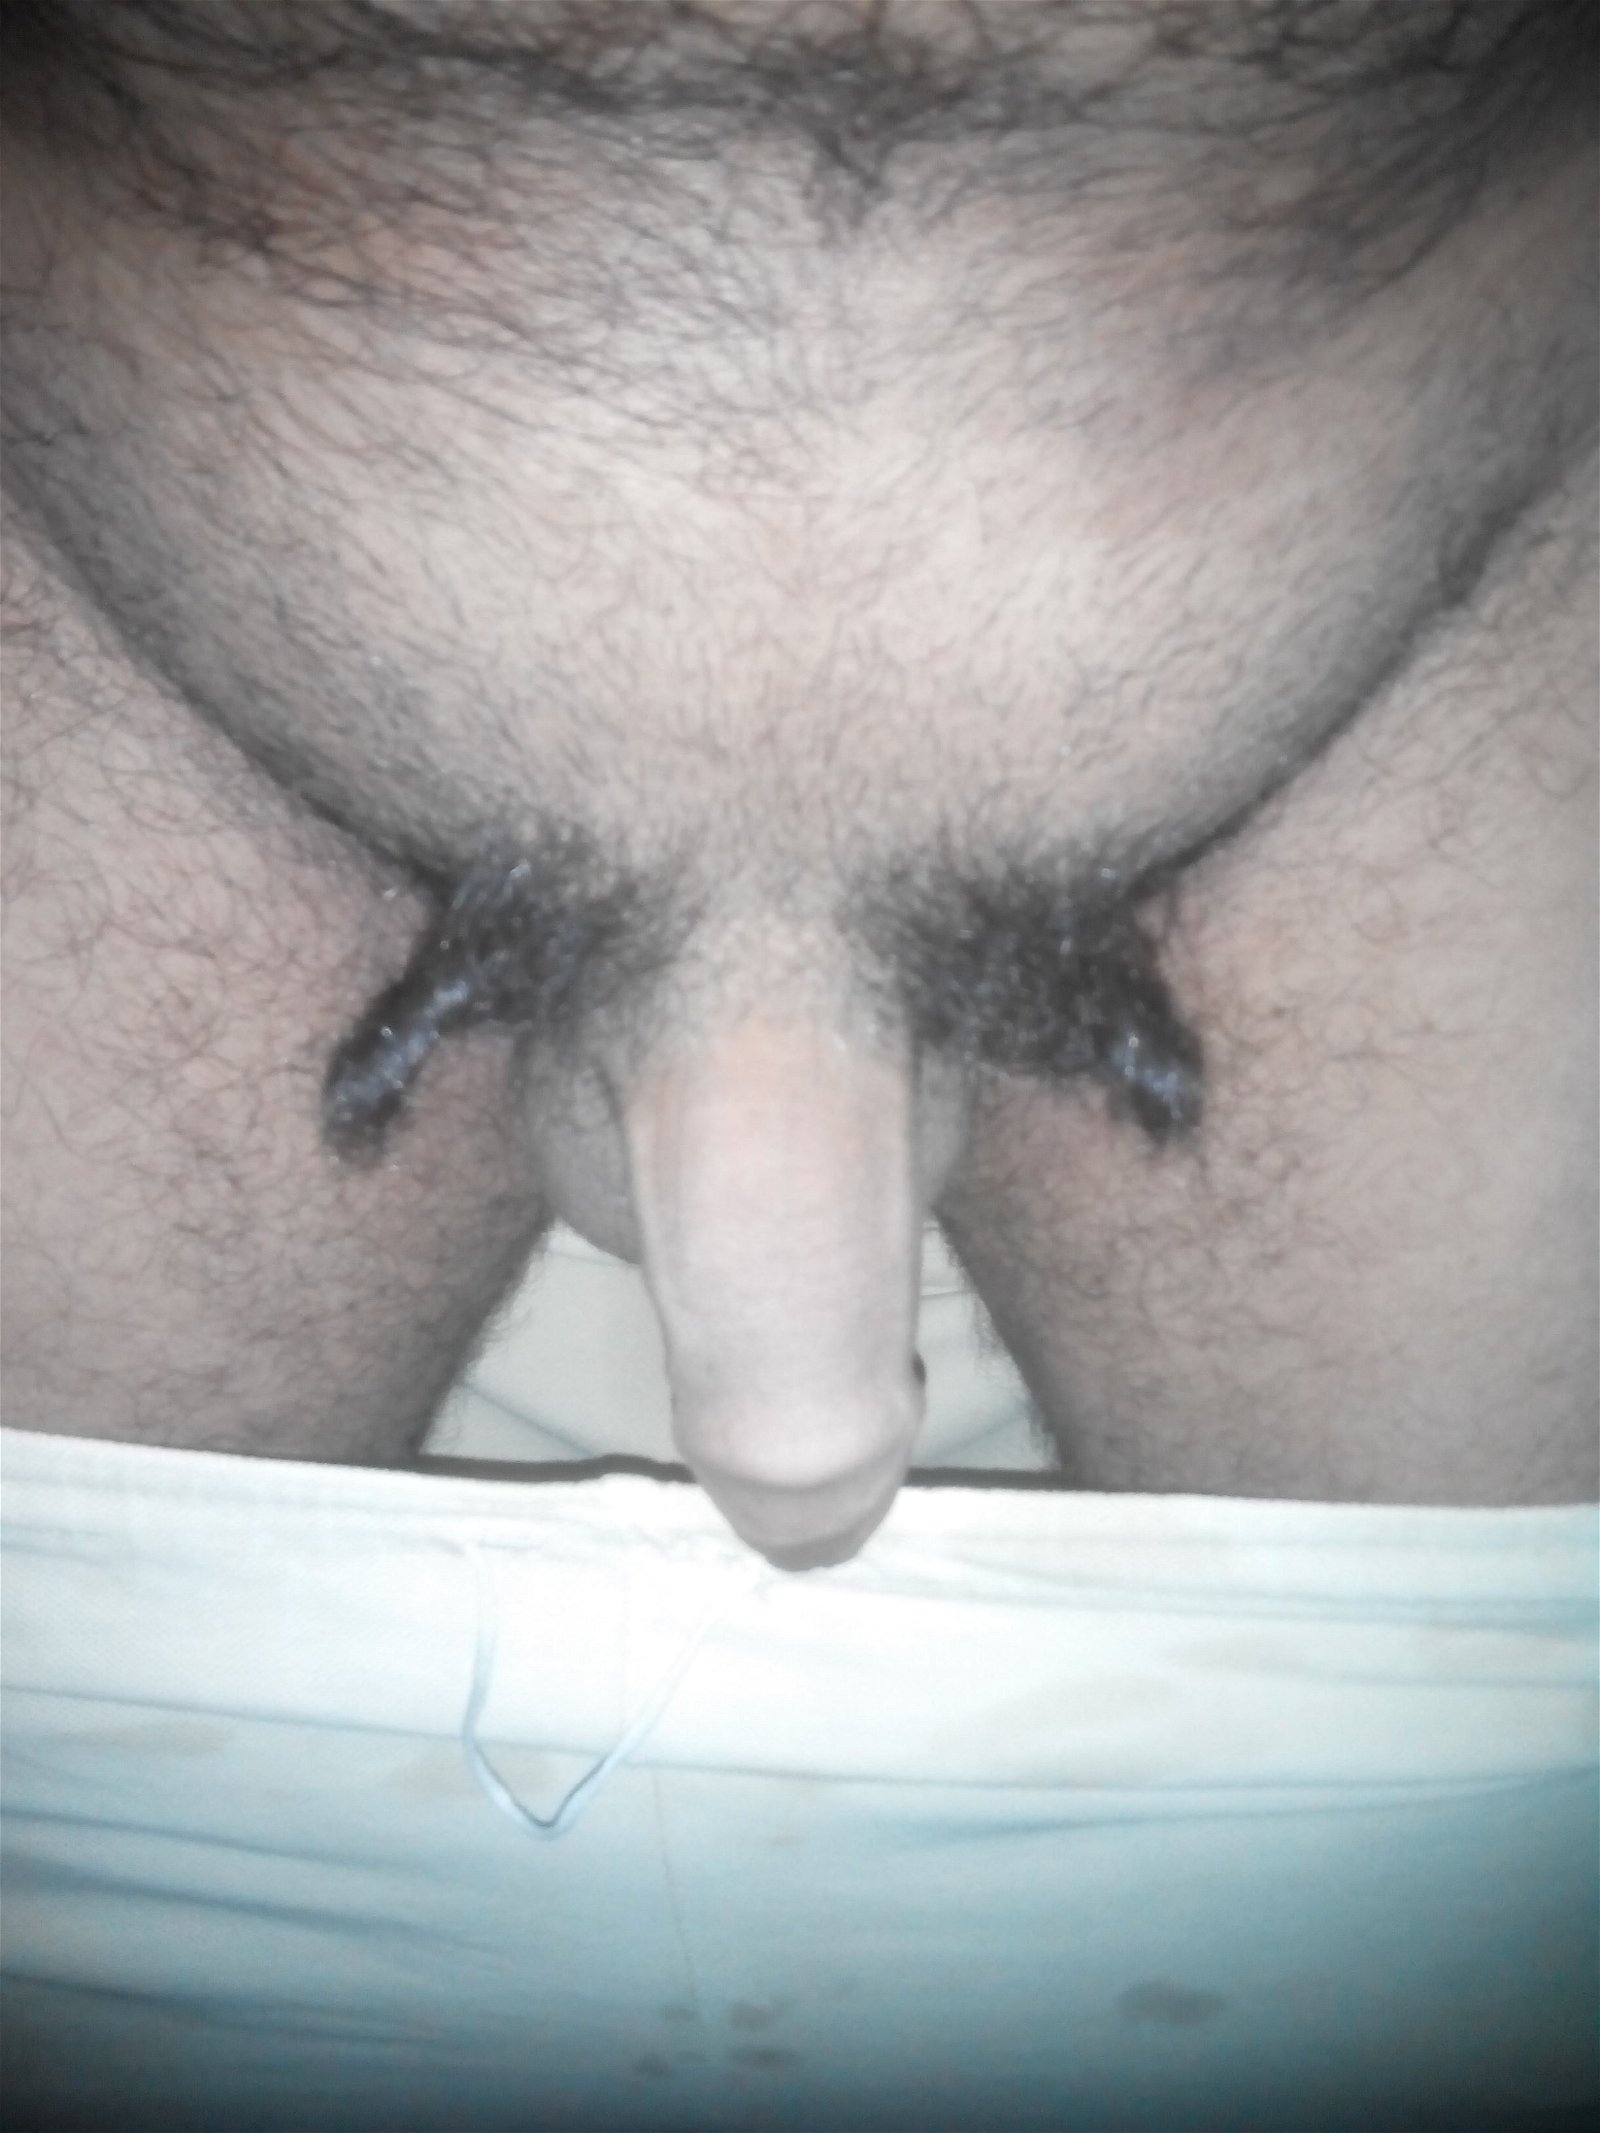 Photo by Pussy Hunter with the username @raj1040, posted on February 15, 2020. The post is about the topic Hairy Penis